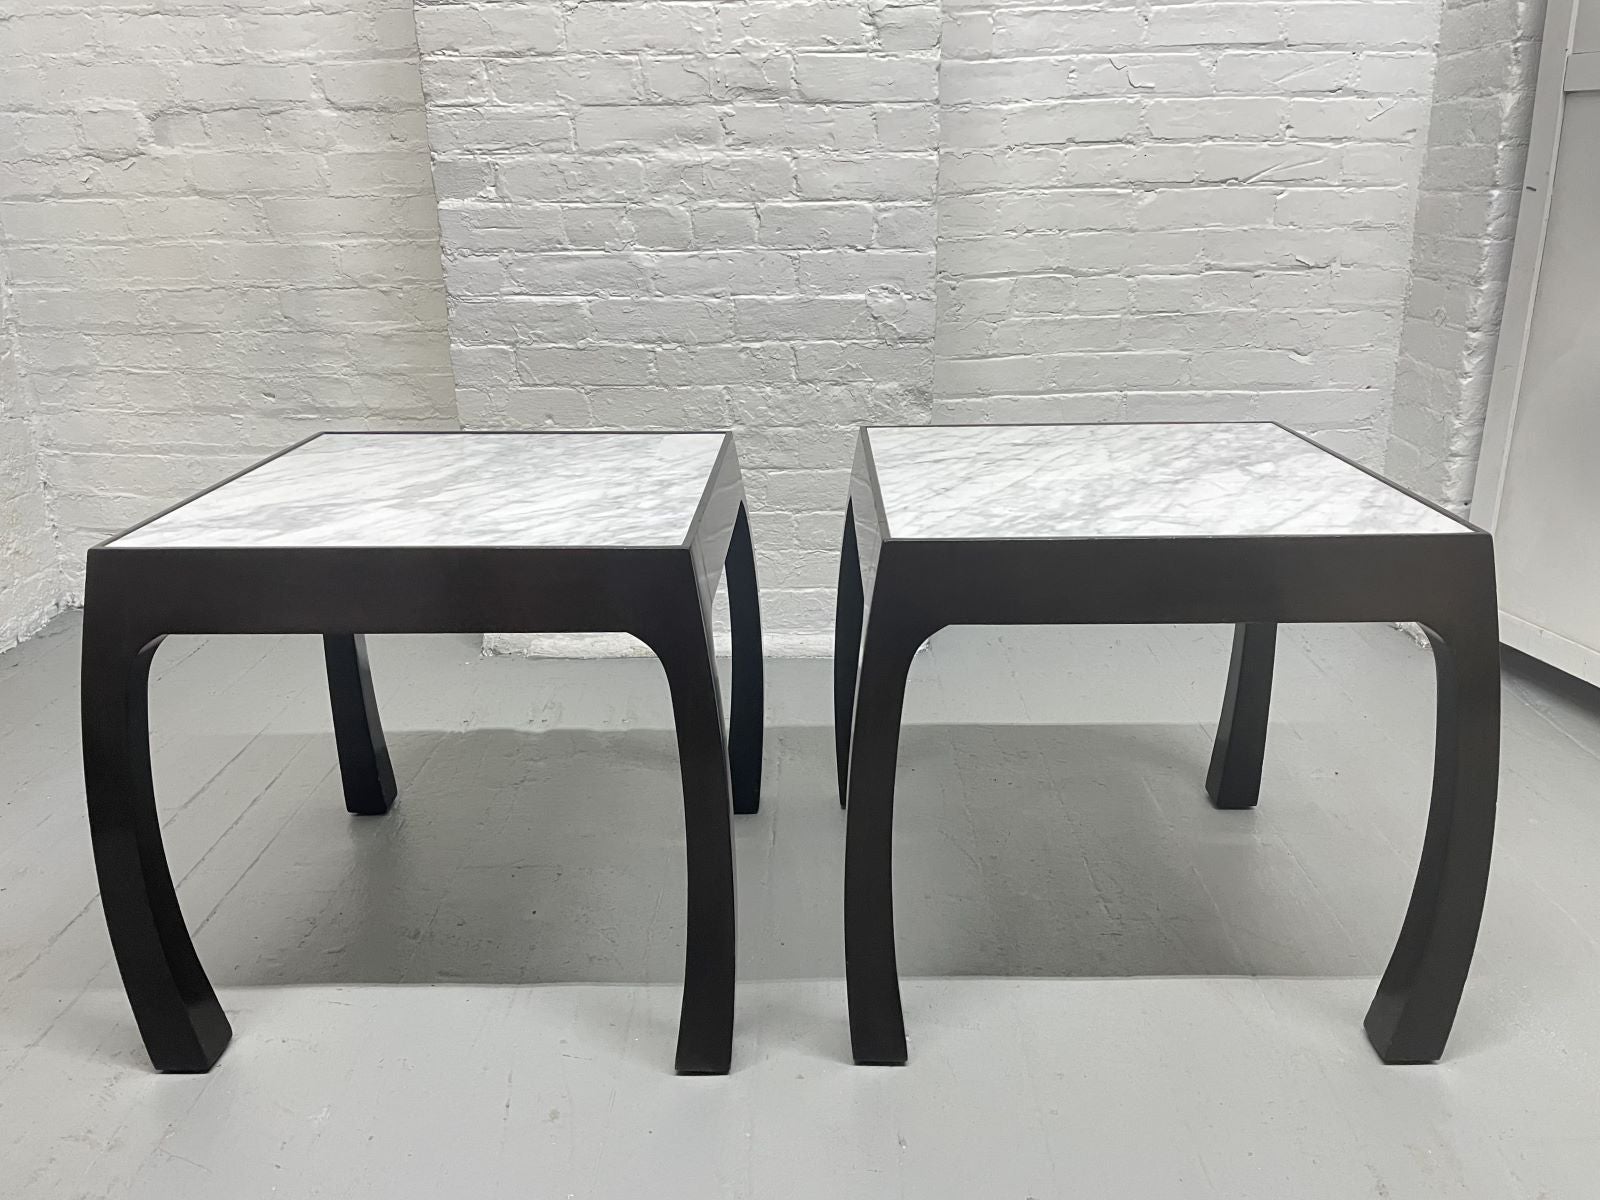 Pair of Harvey Probber 1960s Carrara marble top end tables. The frames of the tables are mahogany with a dark lacquered finish. Tables have curved legs.